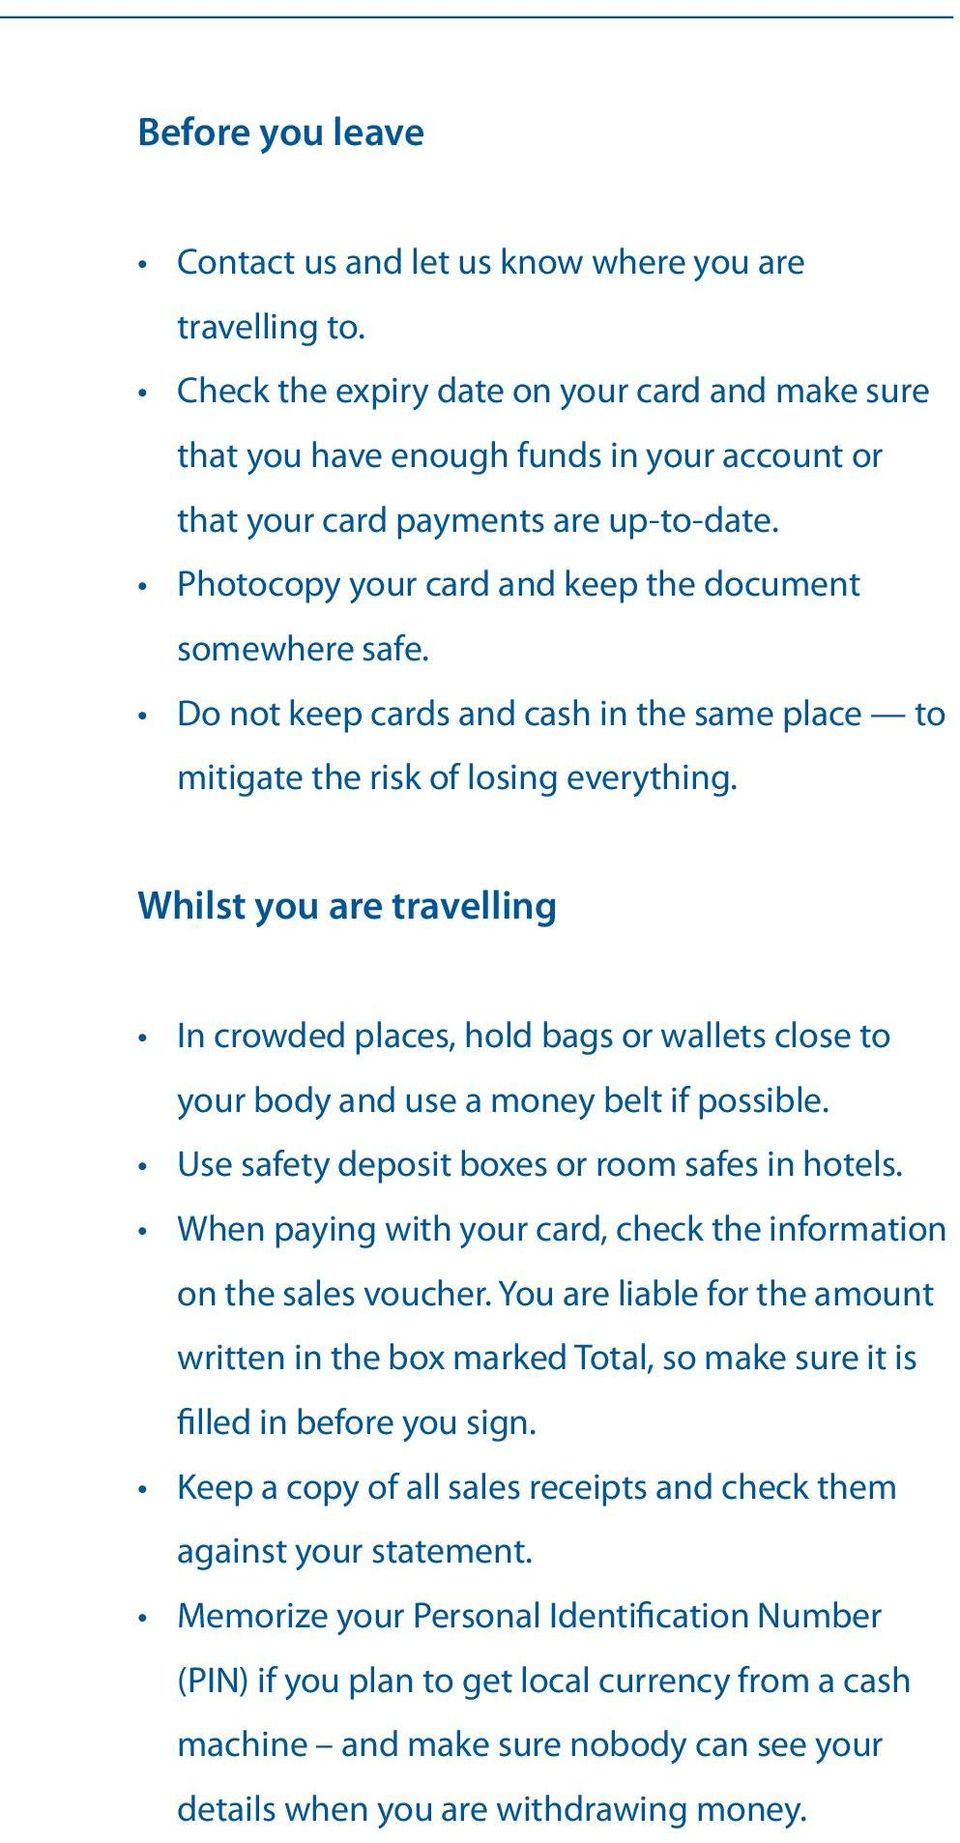 Do not keep cards and cash in the same place to mitigate the risk of losing everything.